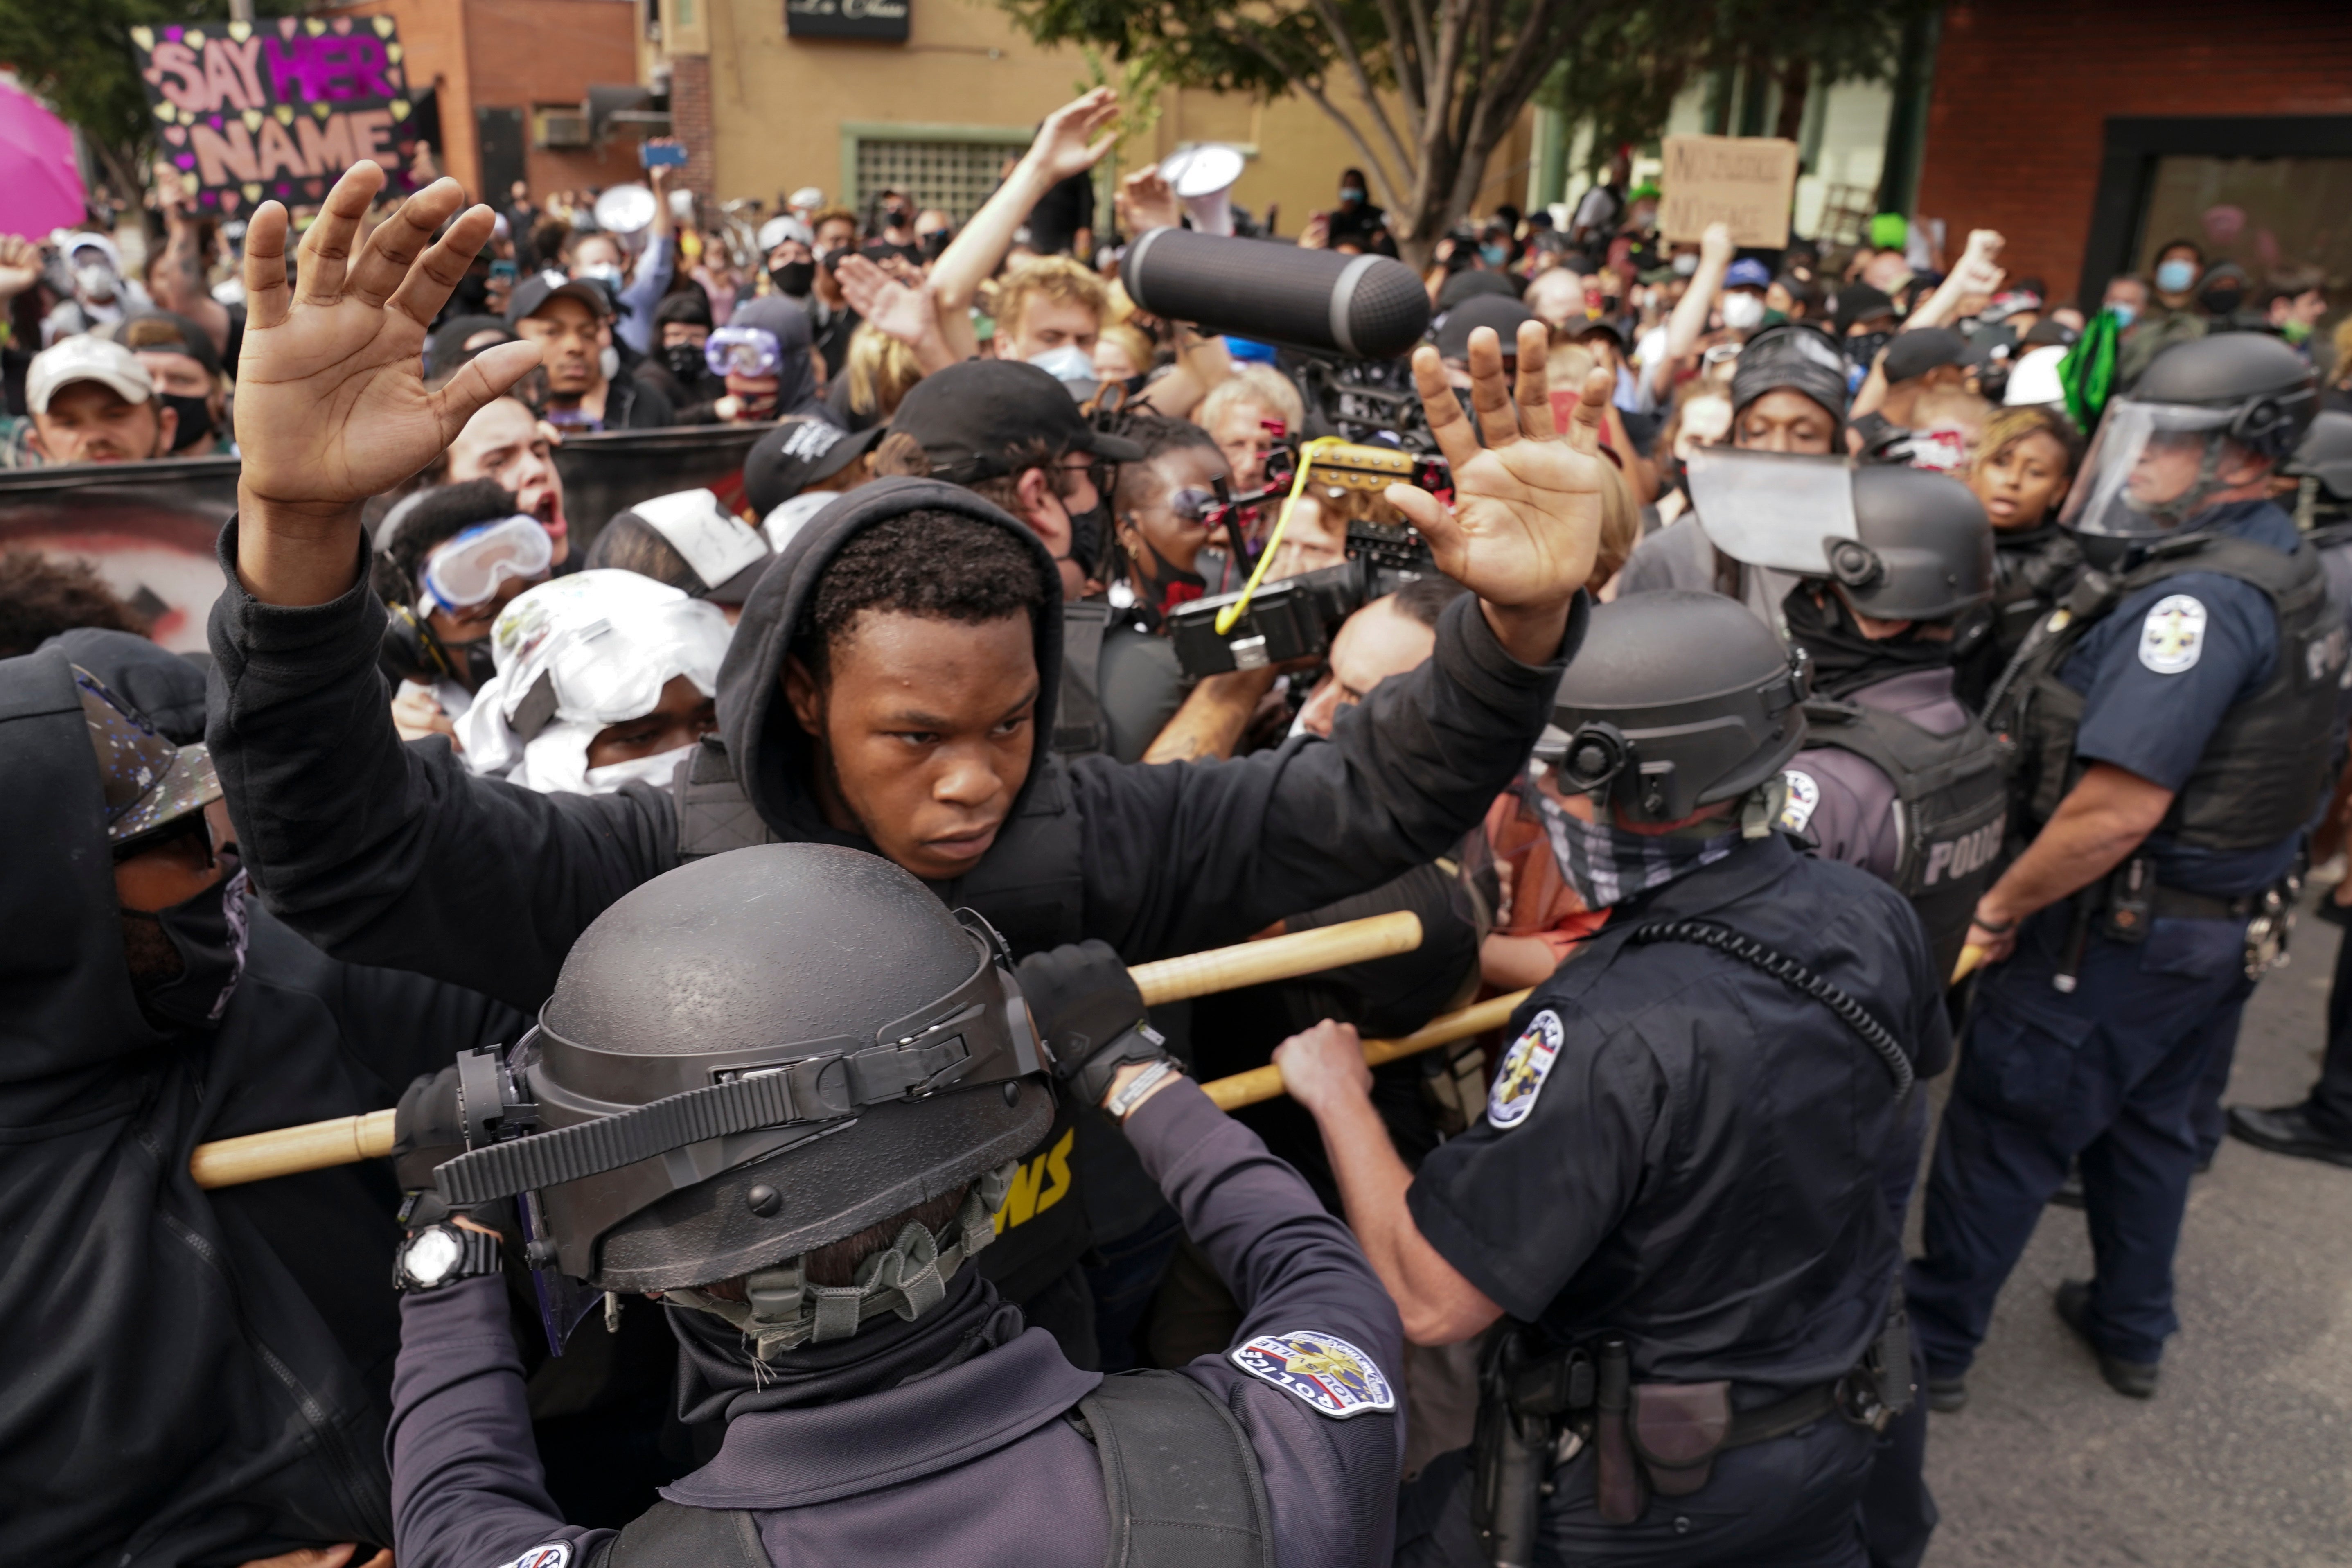 Angry clashes between police and protesters broke out in Louisville on Wednesday night